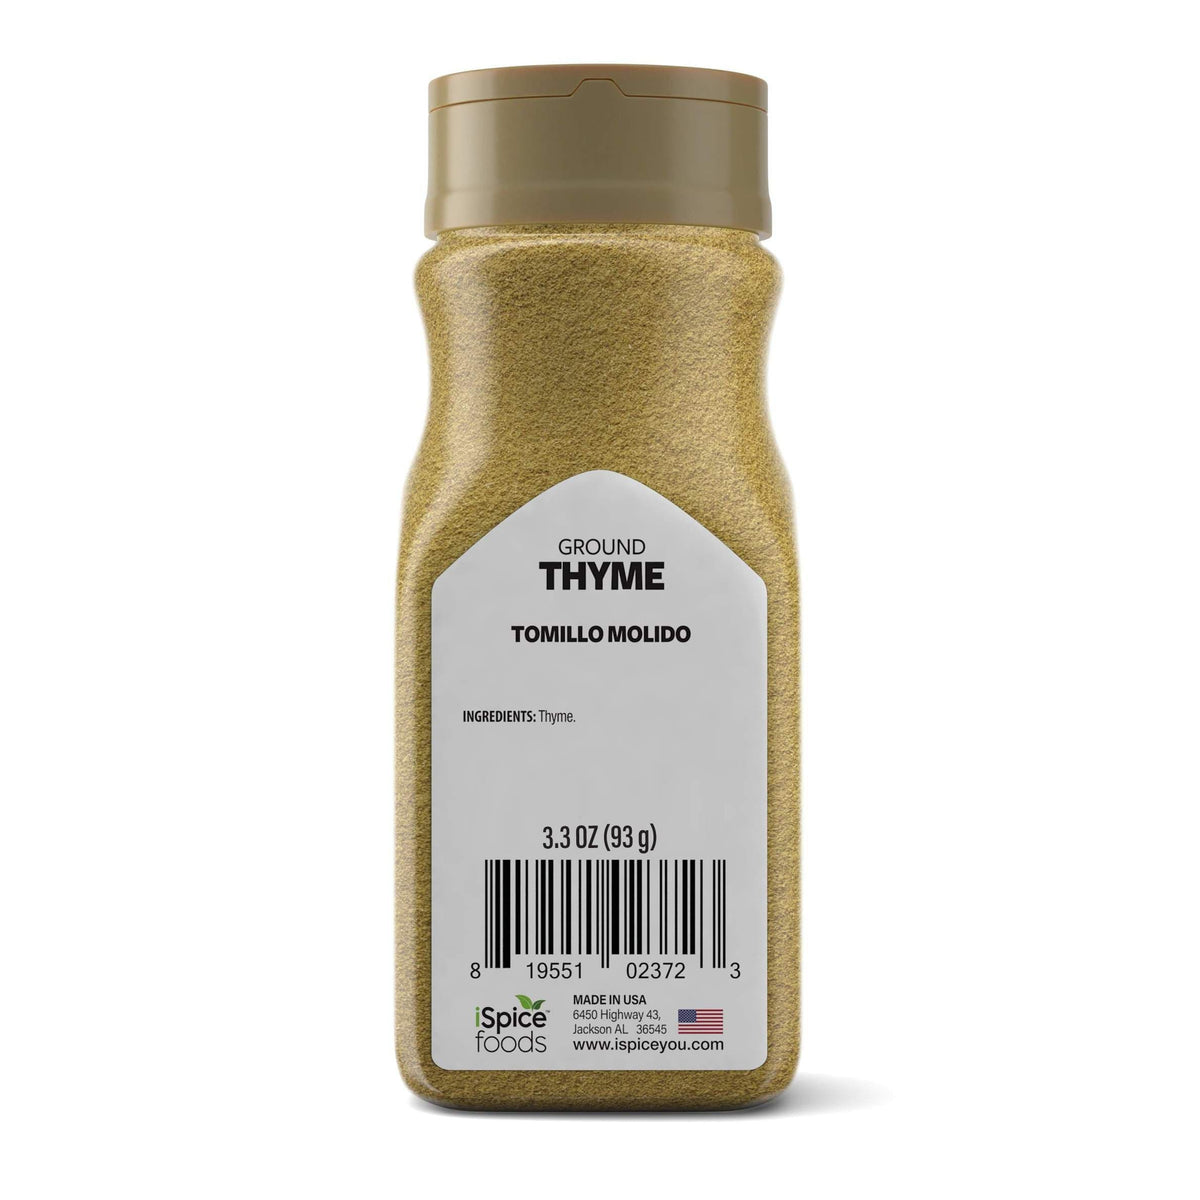 An Overview of the Benefits of Ground Thyme